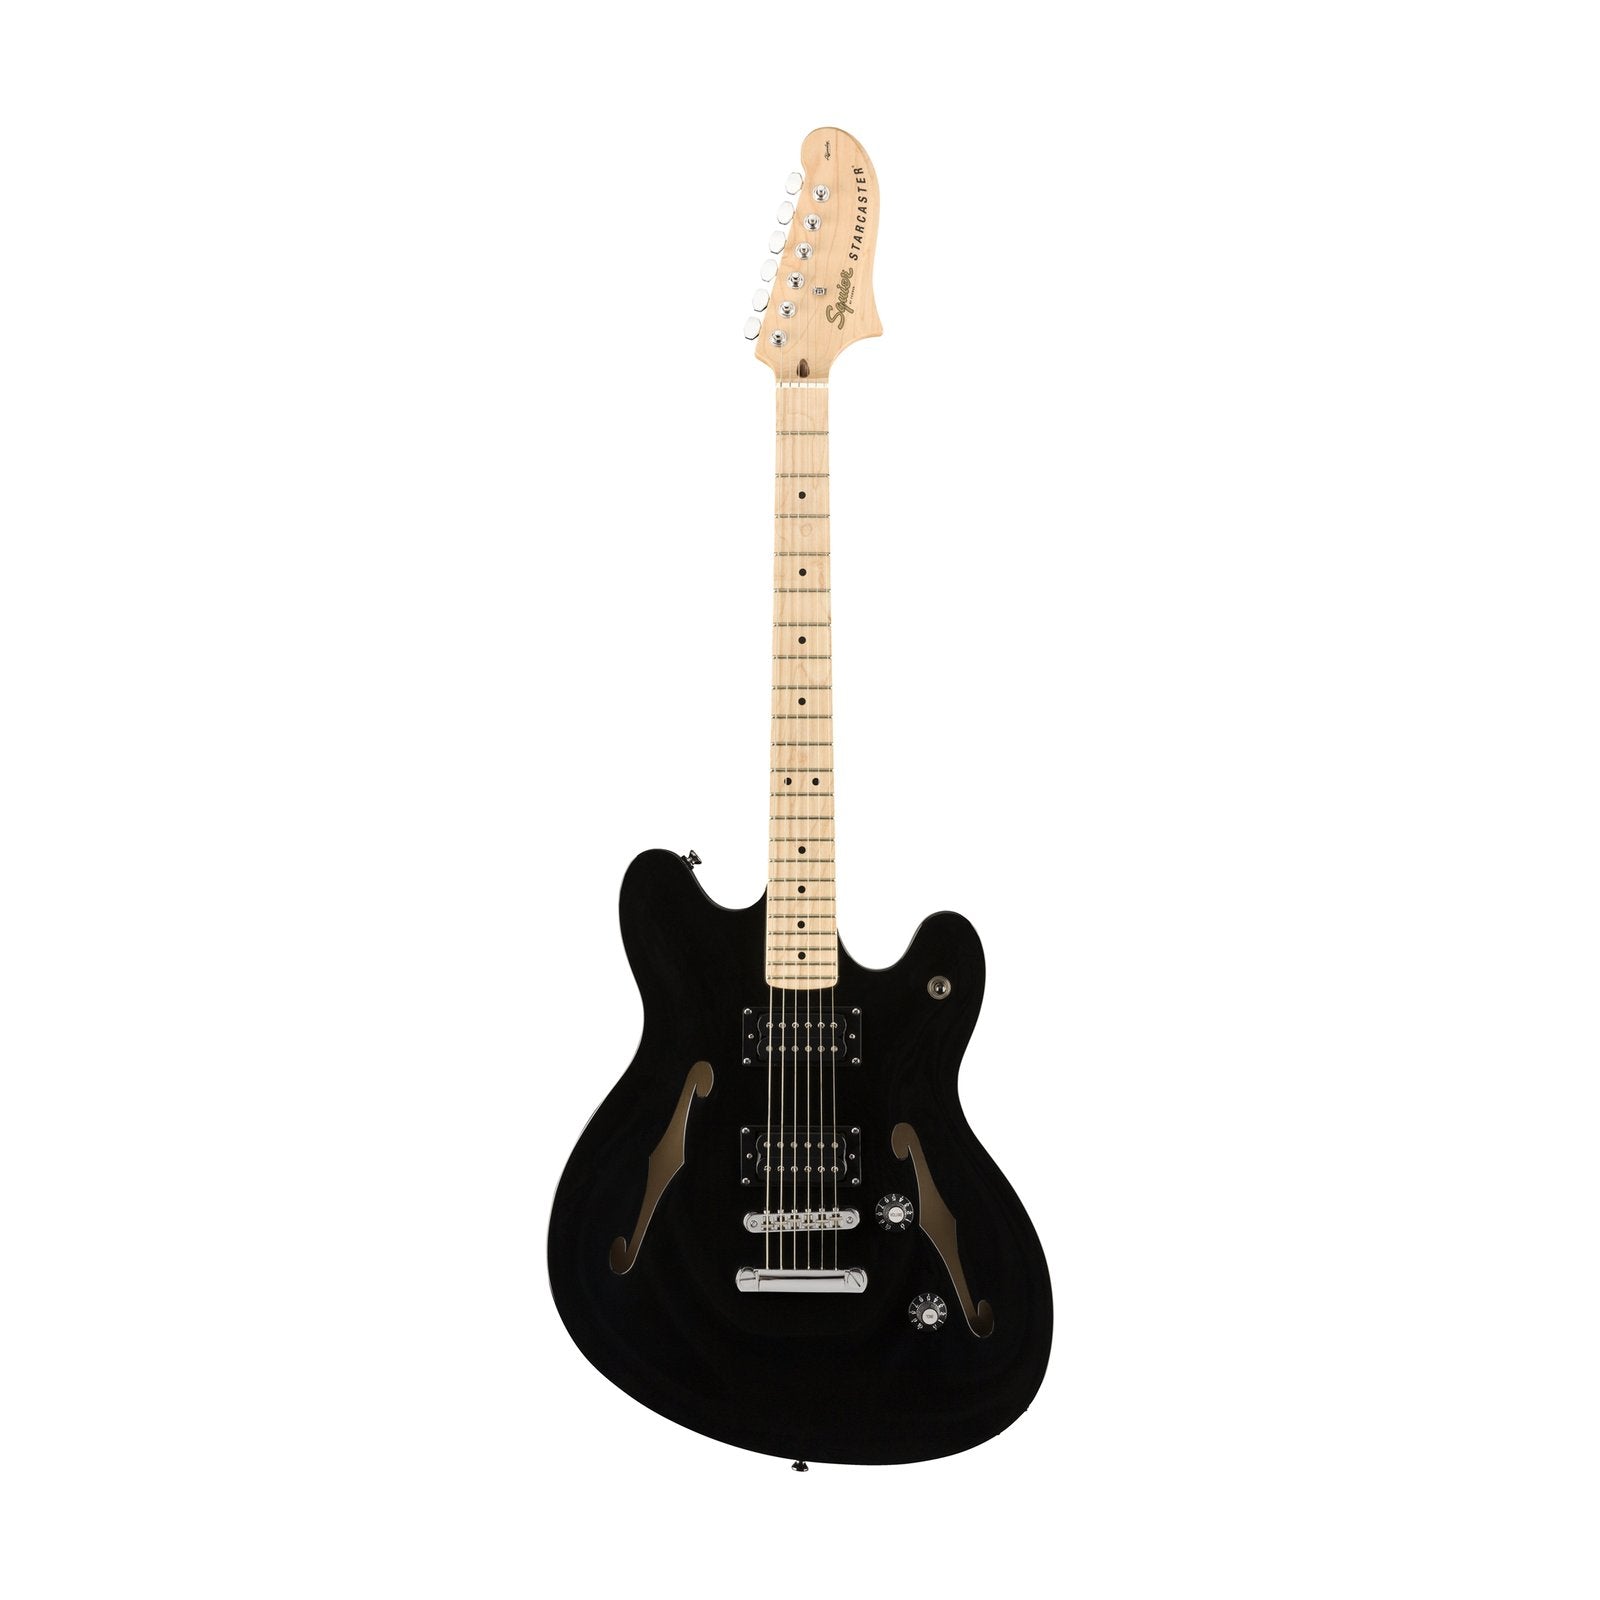 Squier Affinity Series Starcaster Electric Guitar, Maple FB, Black, SQUIER BY FENDER, ELECTRIC GUITAR, squier-by-fender-electric-guitar-037-0590-506, ZOSO MUSIC SDN BHD